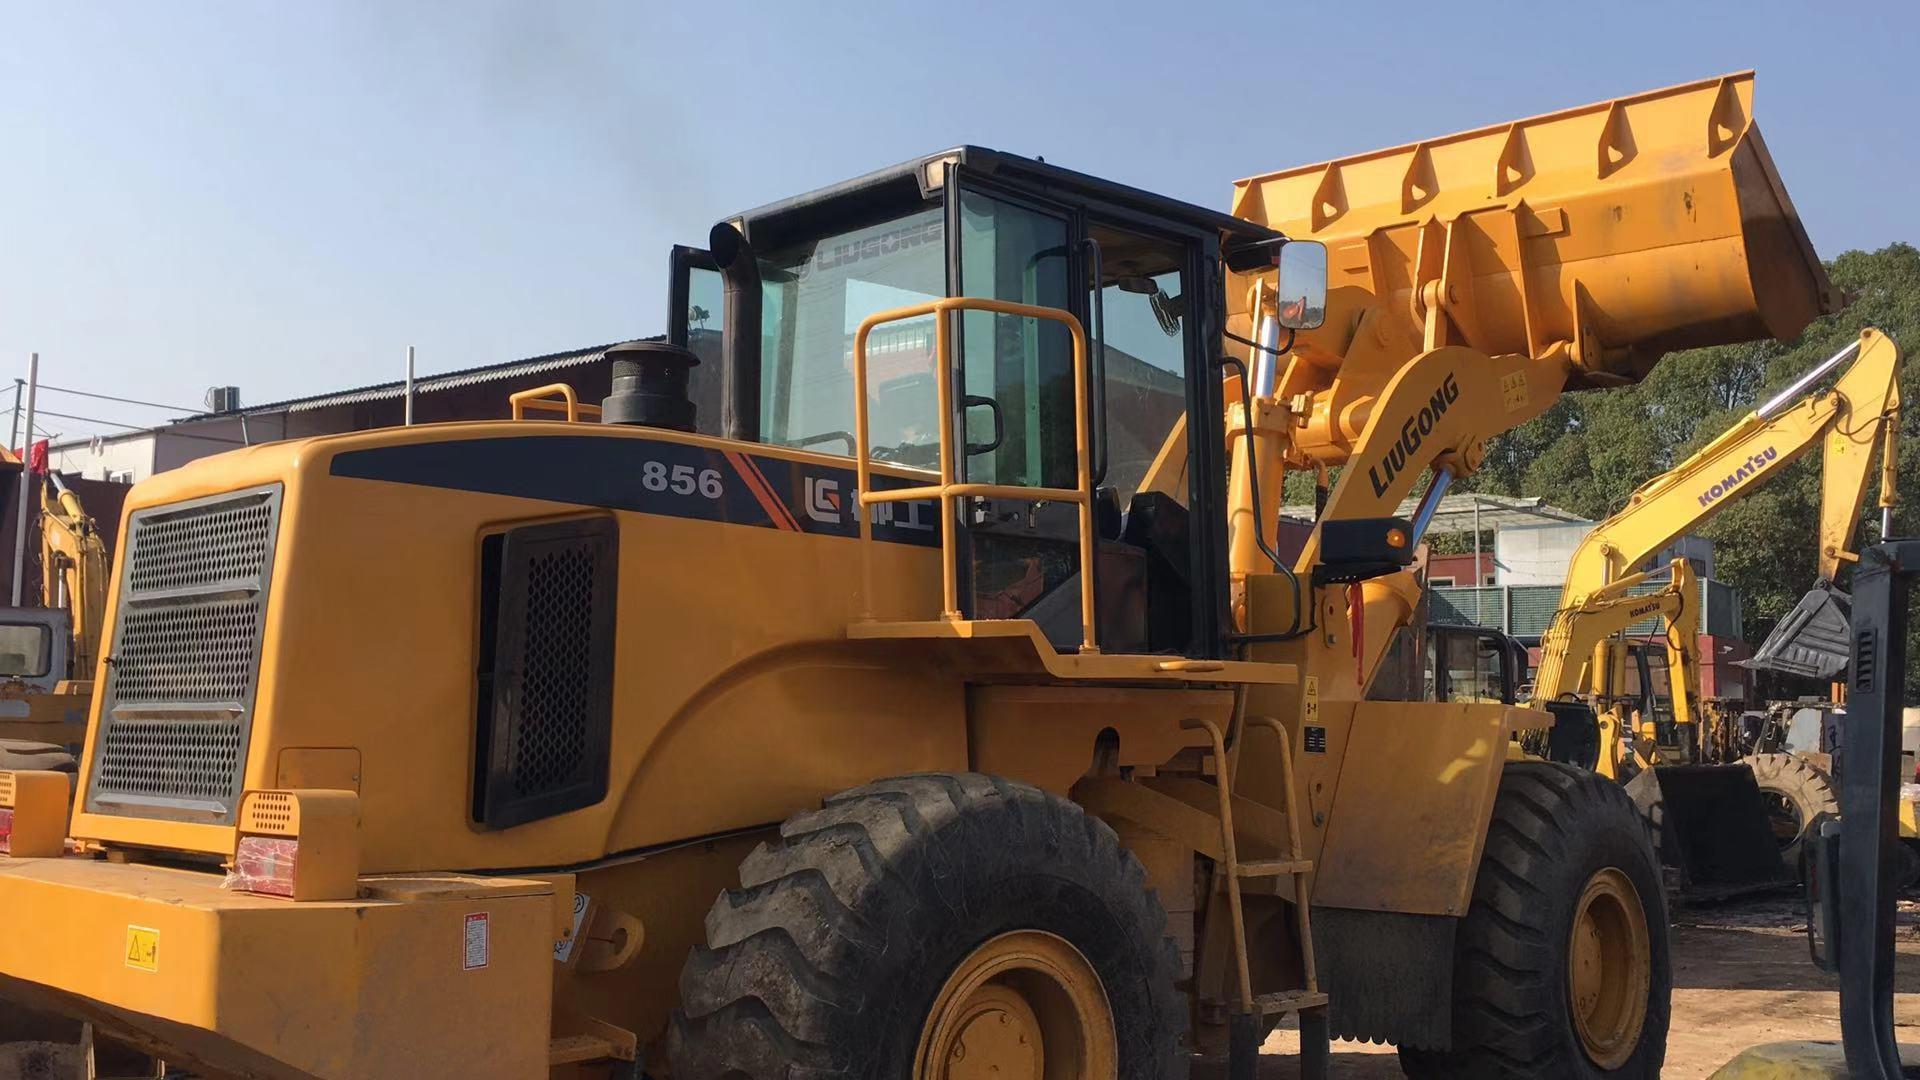 Used LG856 Wheel Loader with Good Condition in Cheap Price